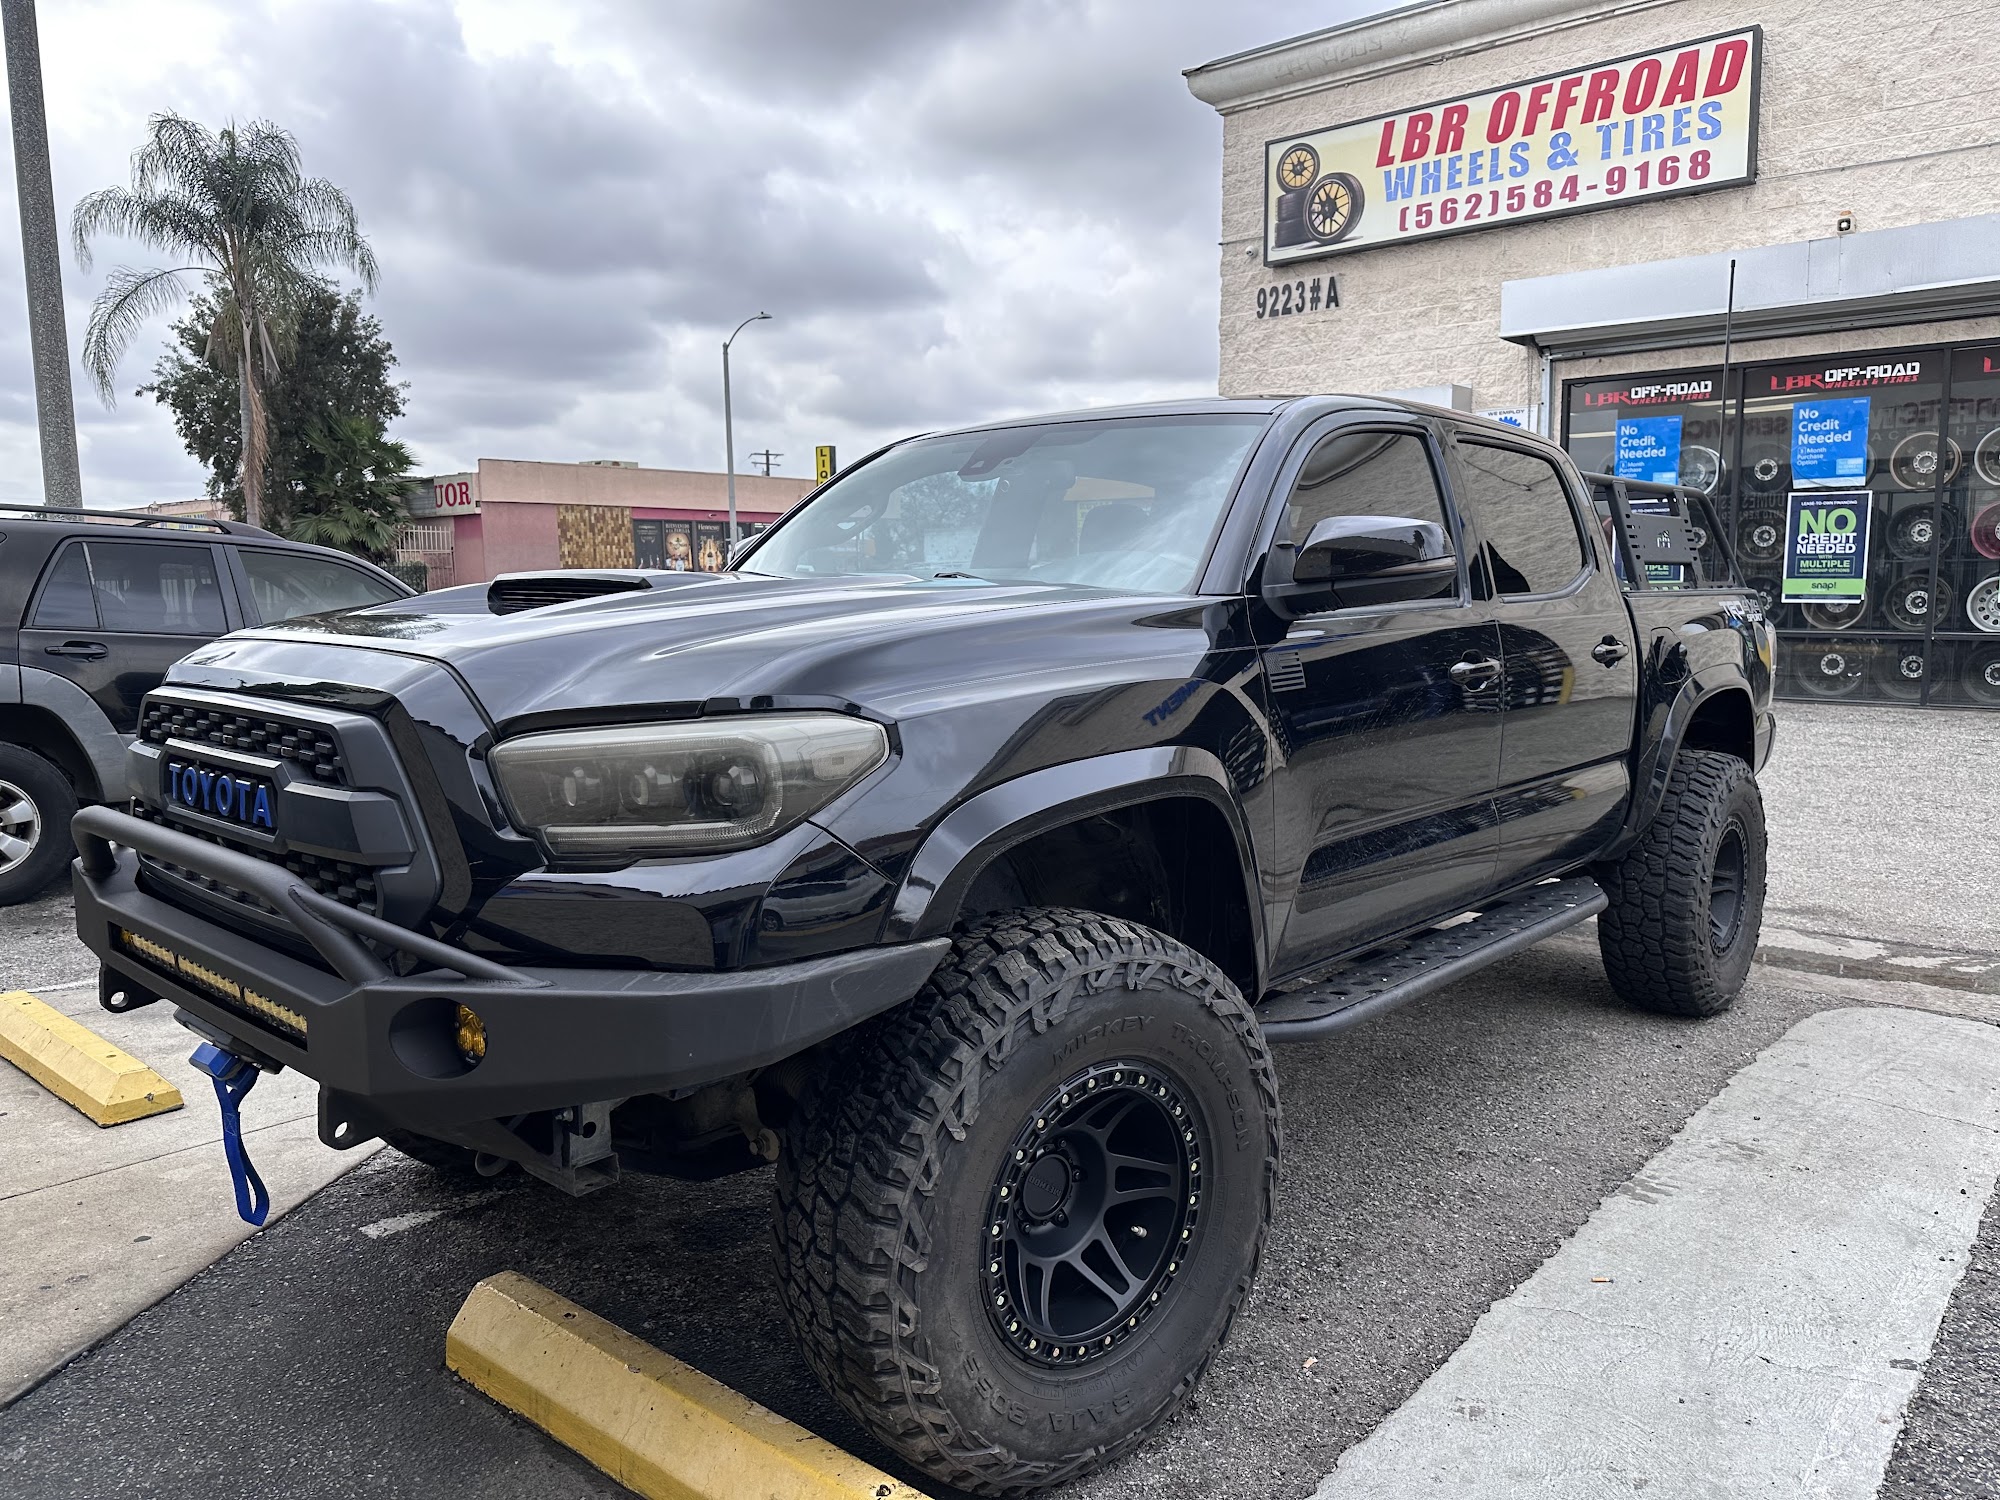 LBR OFFROAD WHEELS AND TIRES